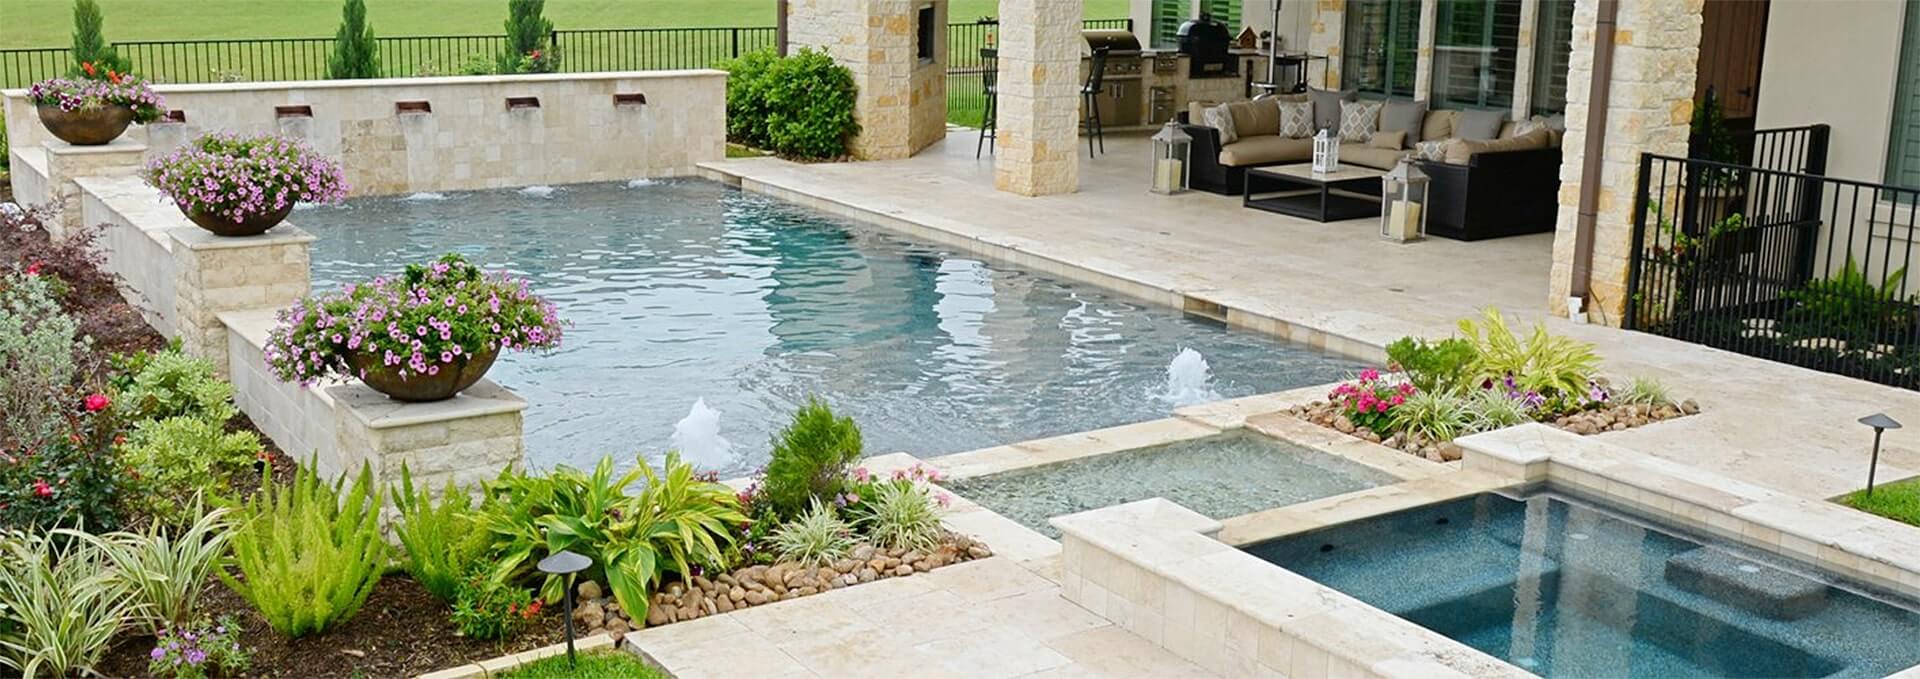 Enjoy Luxury and Comfort with Quality Pool Installation Services in Florida